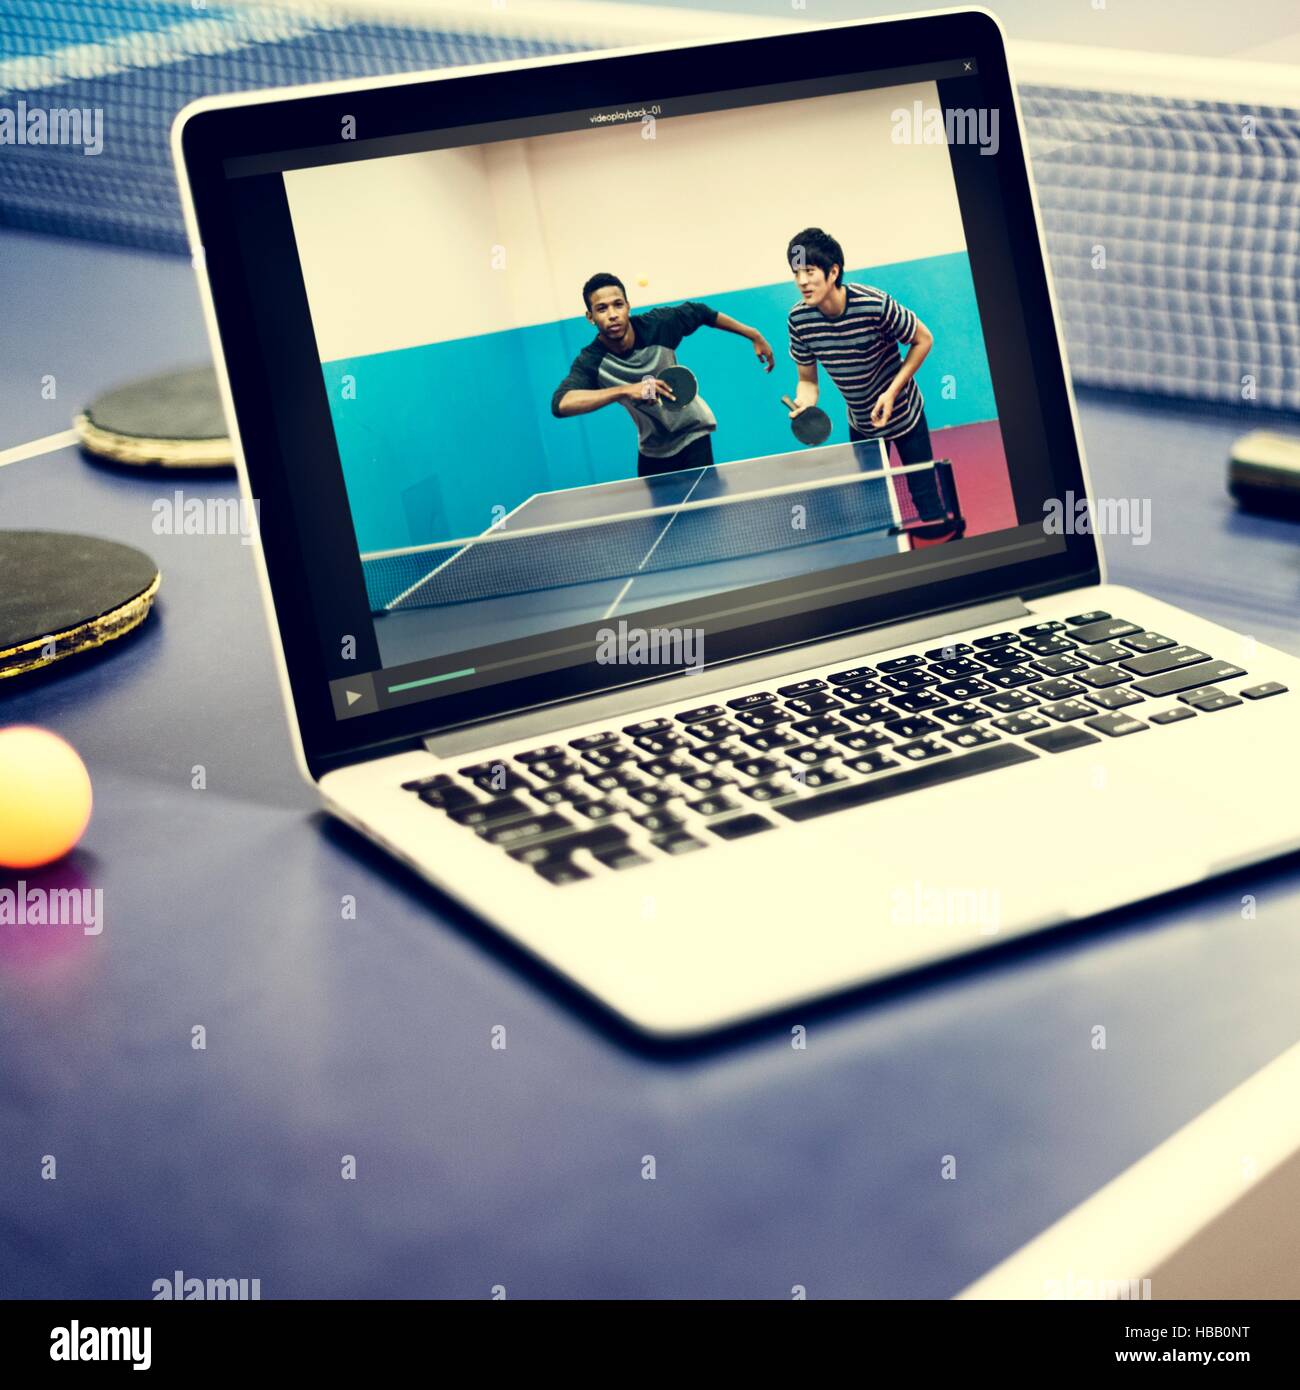 Table Tennis Ping-Pong Sport Video Tutorial Concept Stock Photo